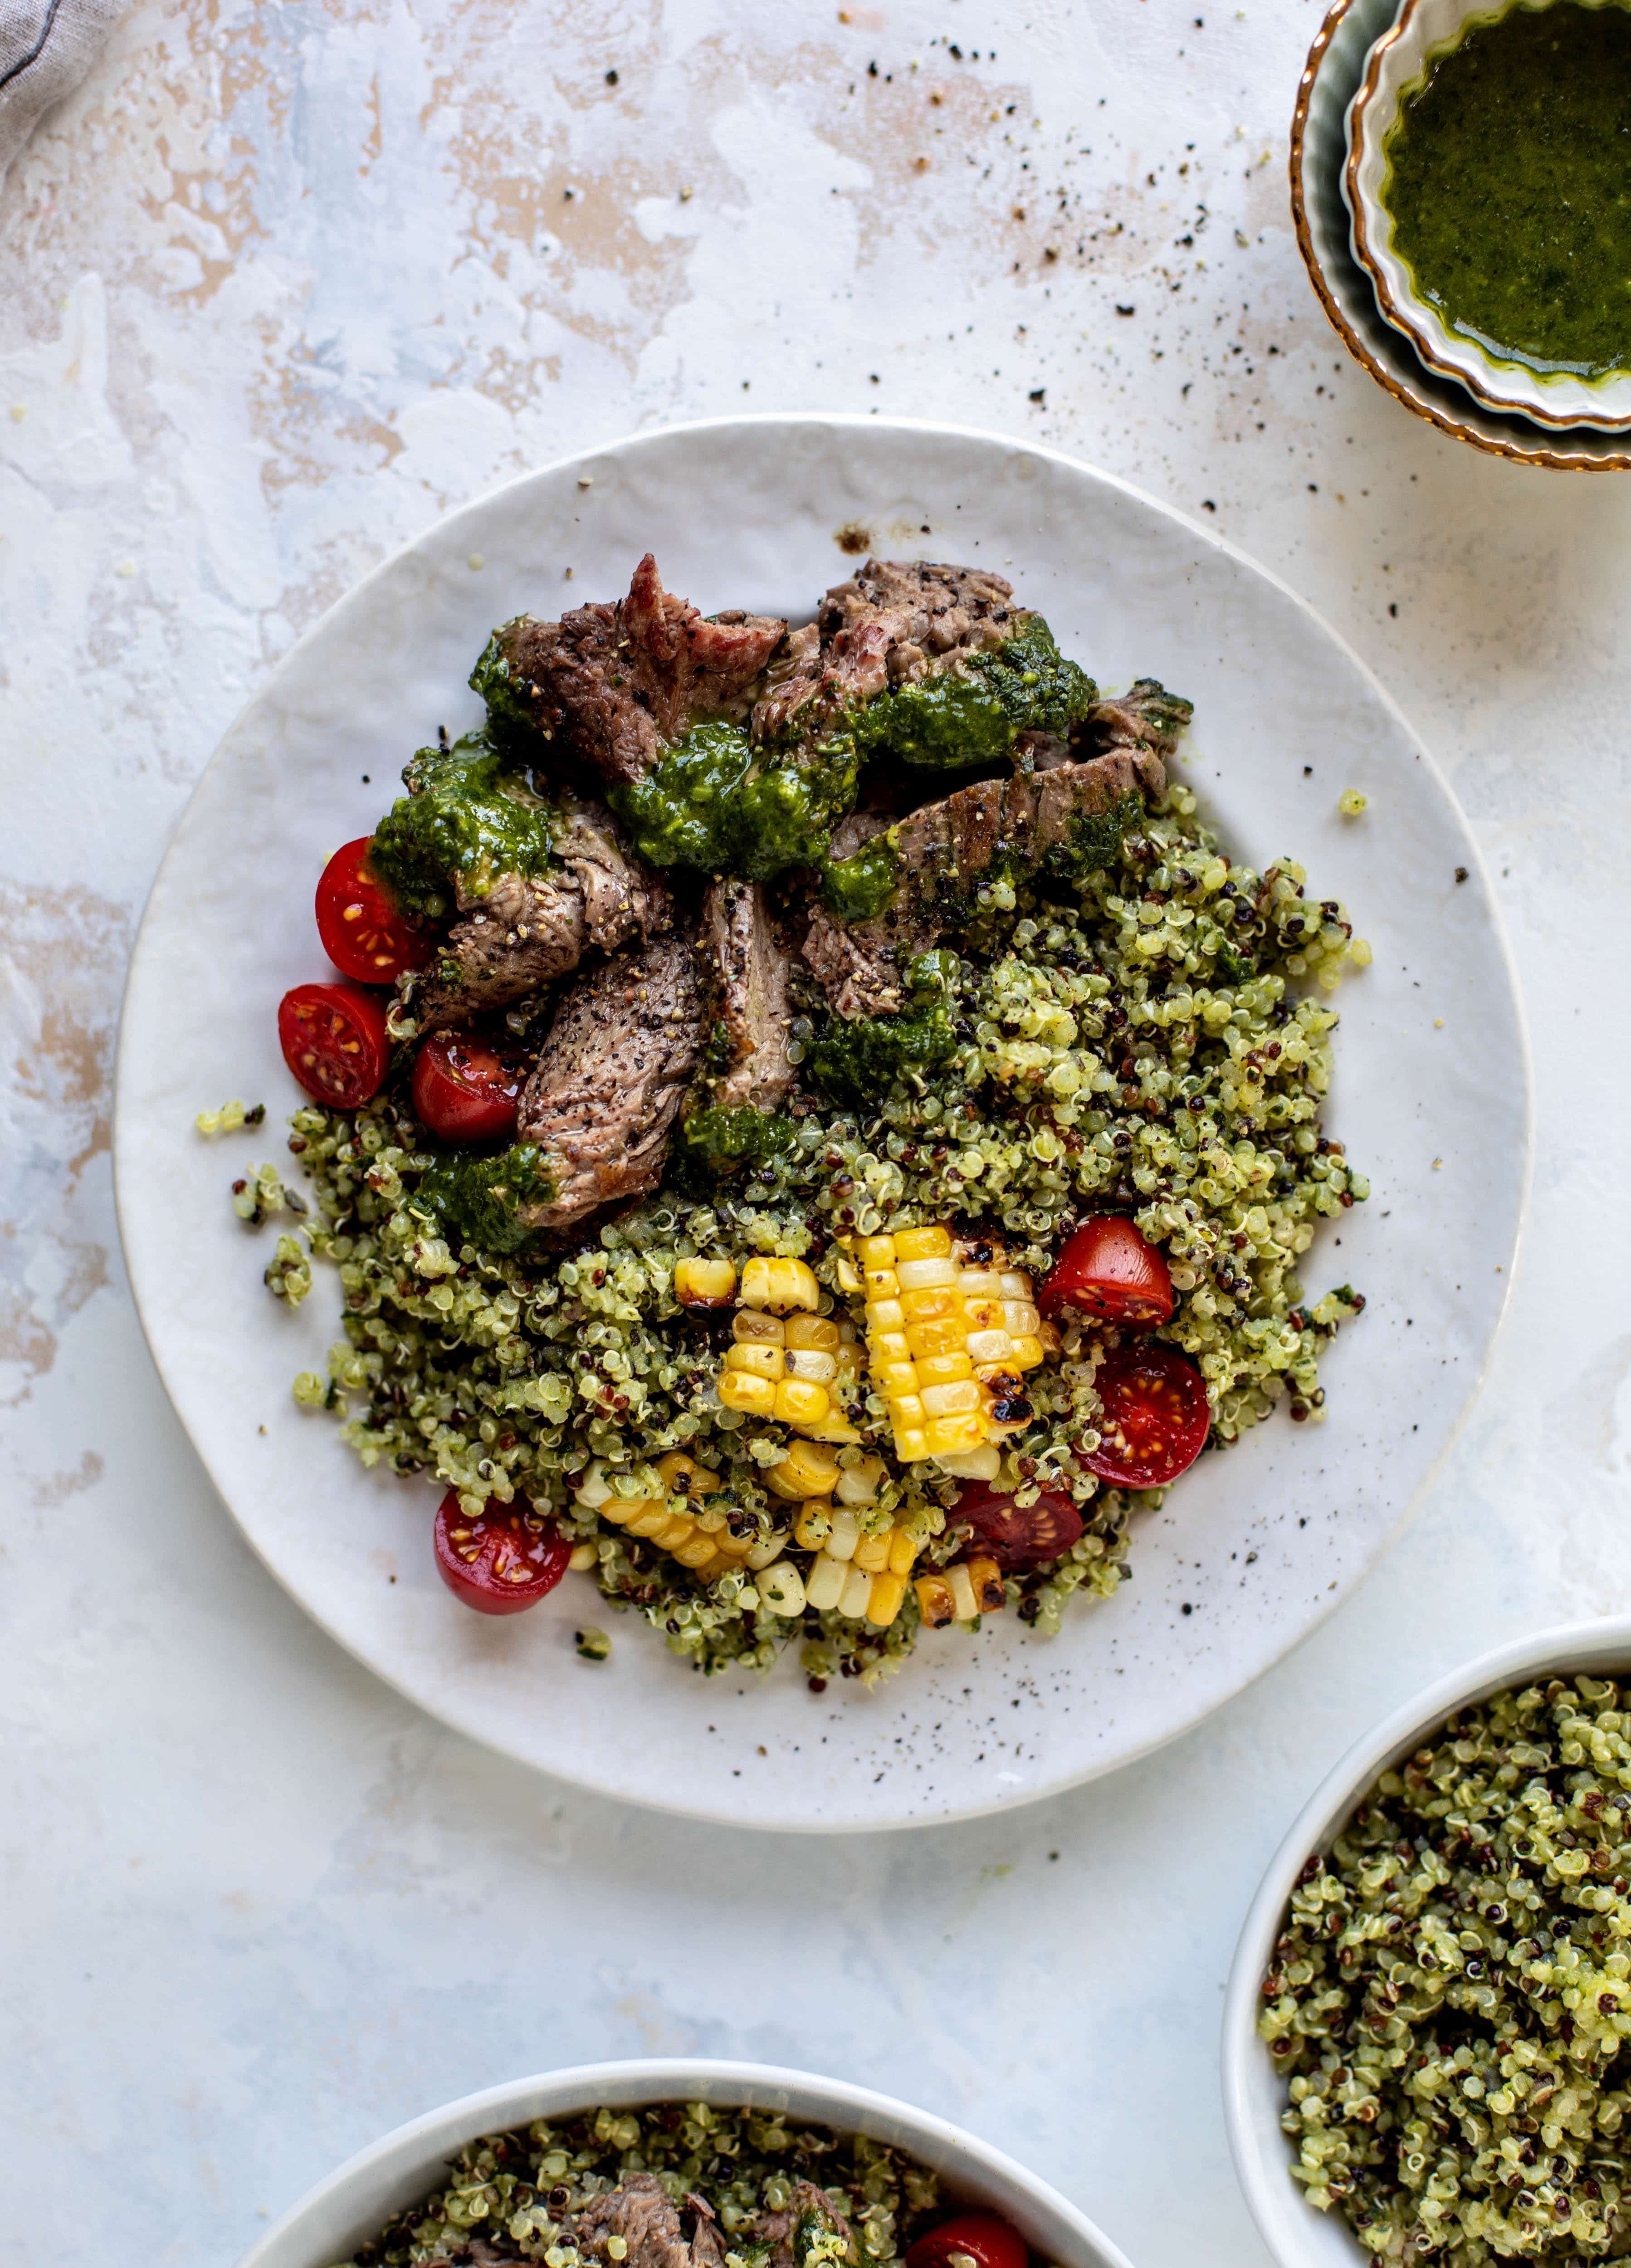 This chimichurri quinoa with flank steak is so incredibly delicious and flavorful! The steak is juicy and tender; the quinoa is loaded with flavor. Love it!